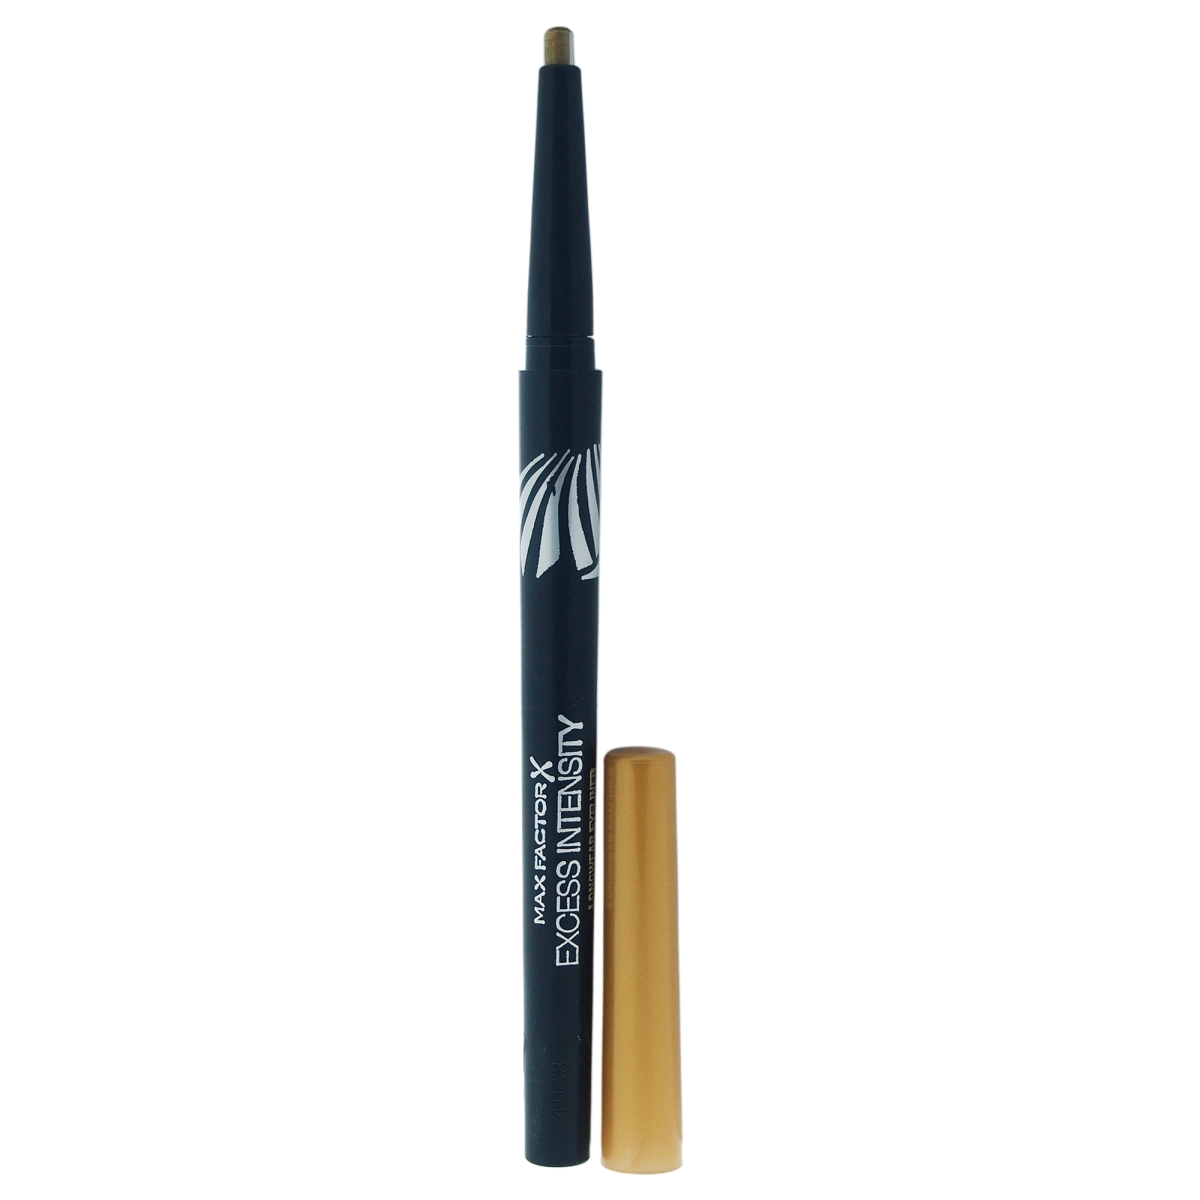 W-c-11186 0.006 Oz No. 01 Excess Intensity Longwear Eyeliner - Excessive Gold For Women